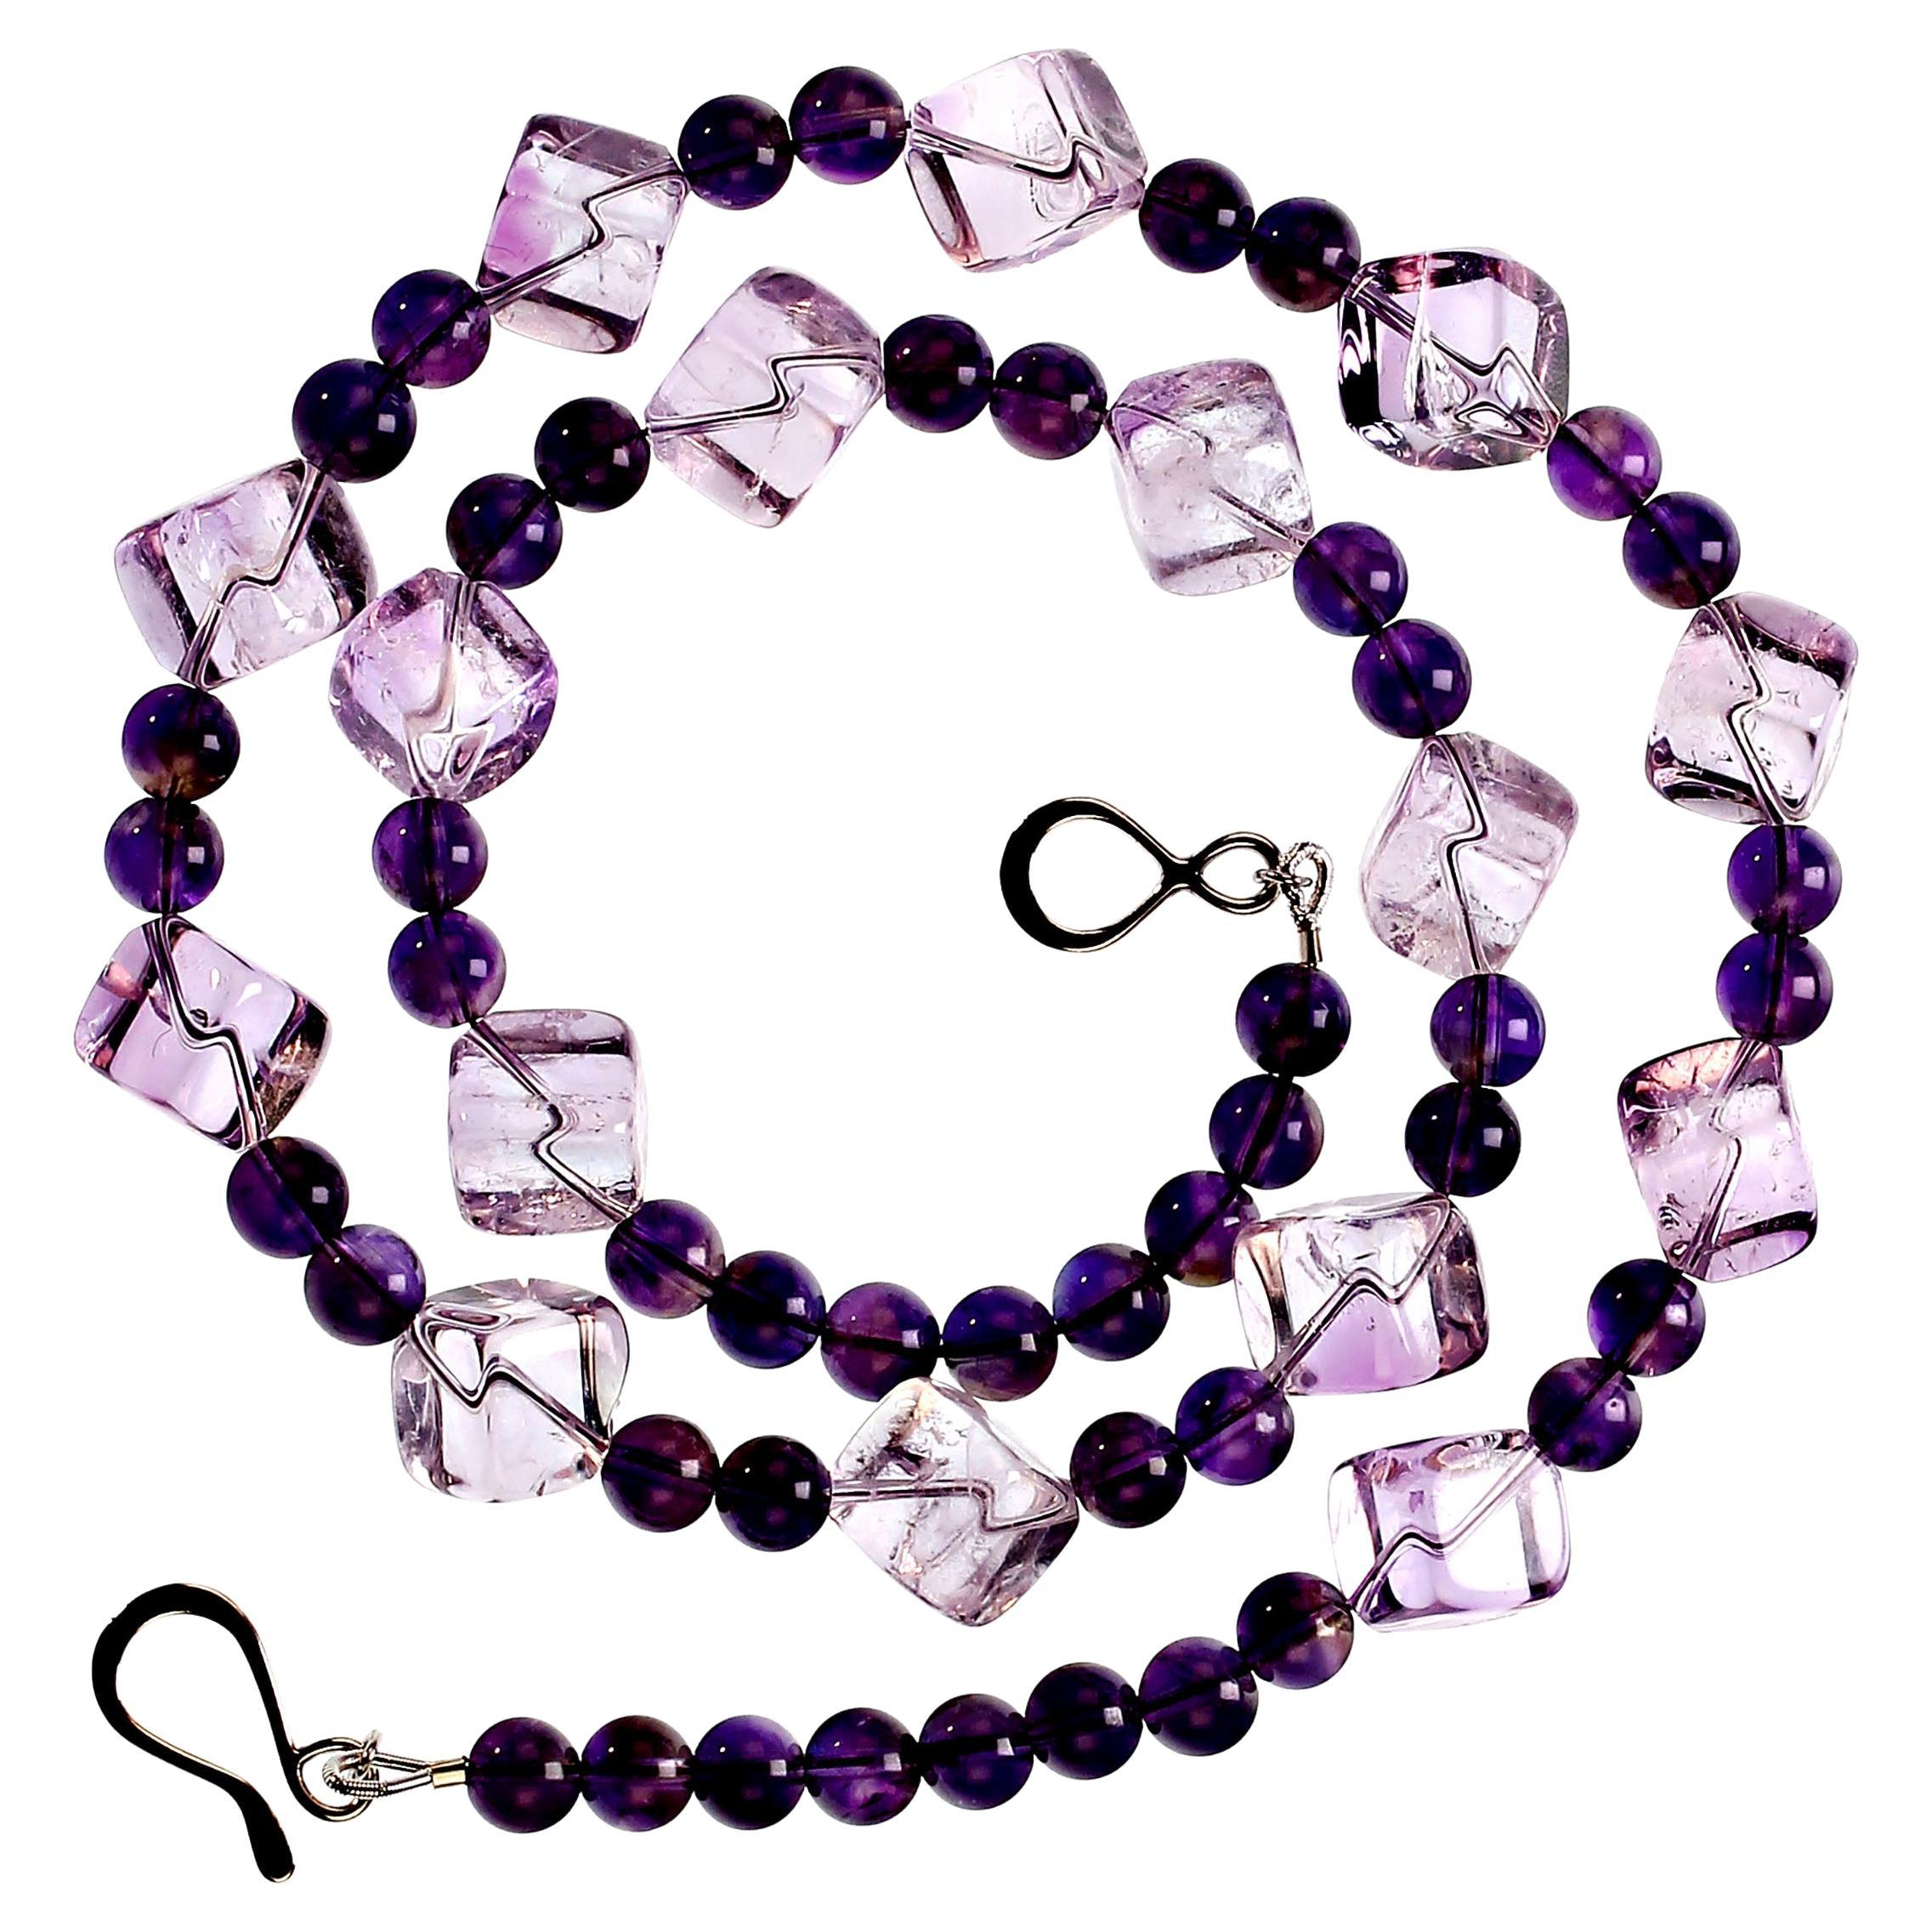 Shades of Amethyst create this unique and gorgeous 21-inch necklace.  The beautifully polished 10mm cubes of rose of france and accented with 6 mm darker amethyst and secured with a sterling silver hook and eye clasp.  MN2342